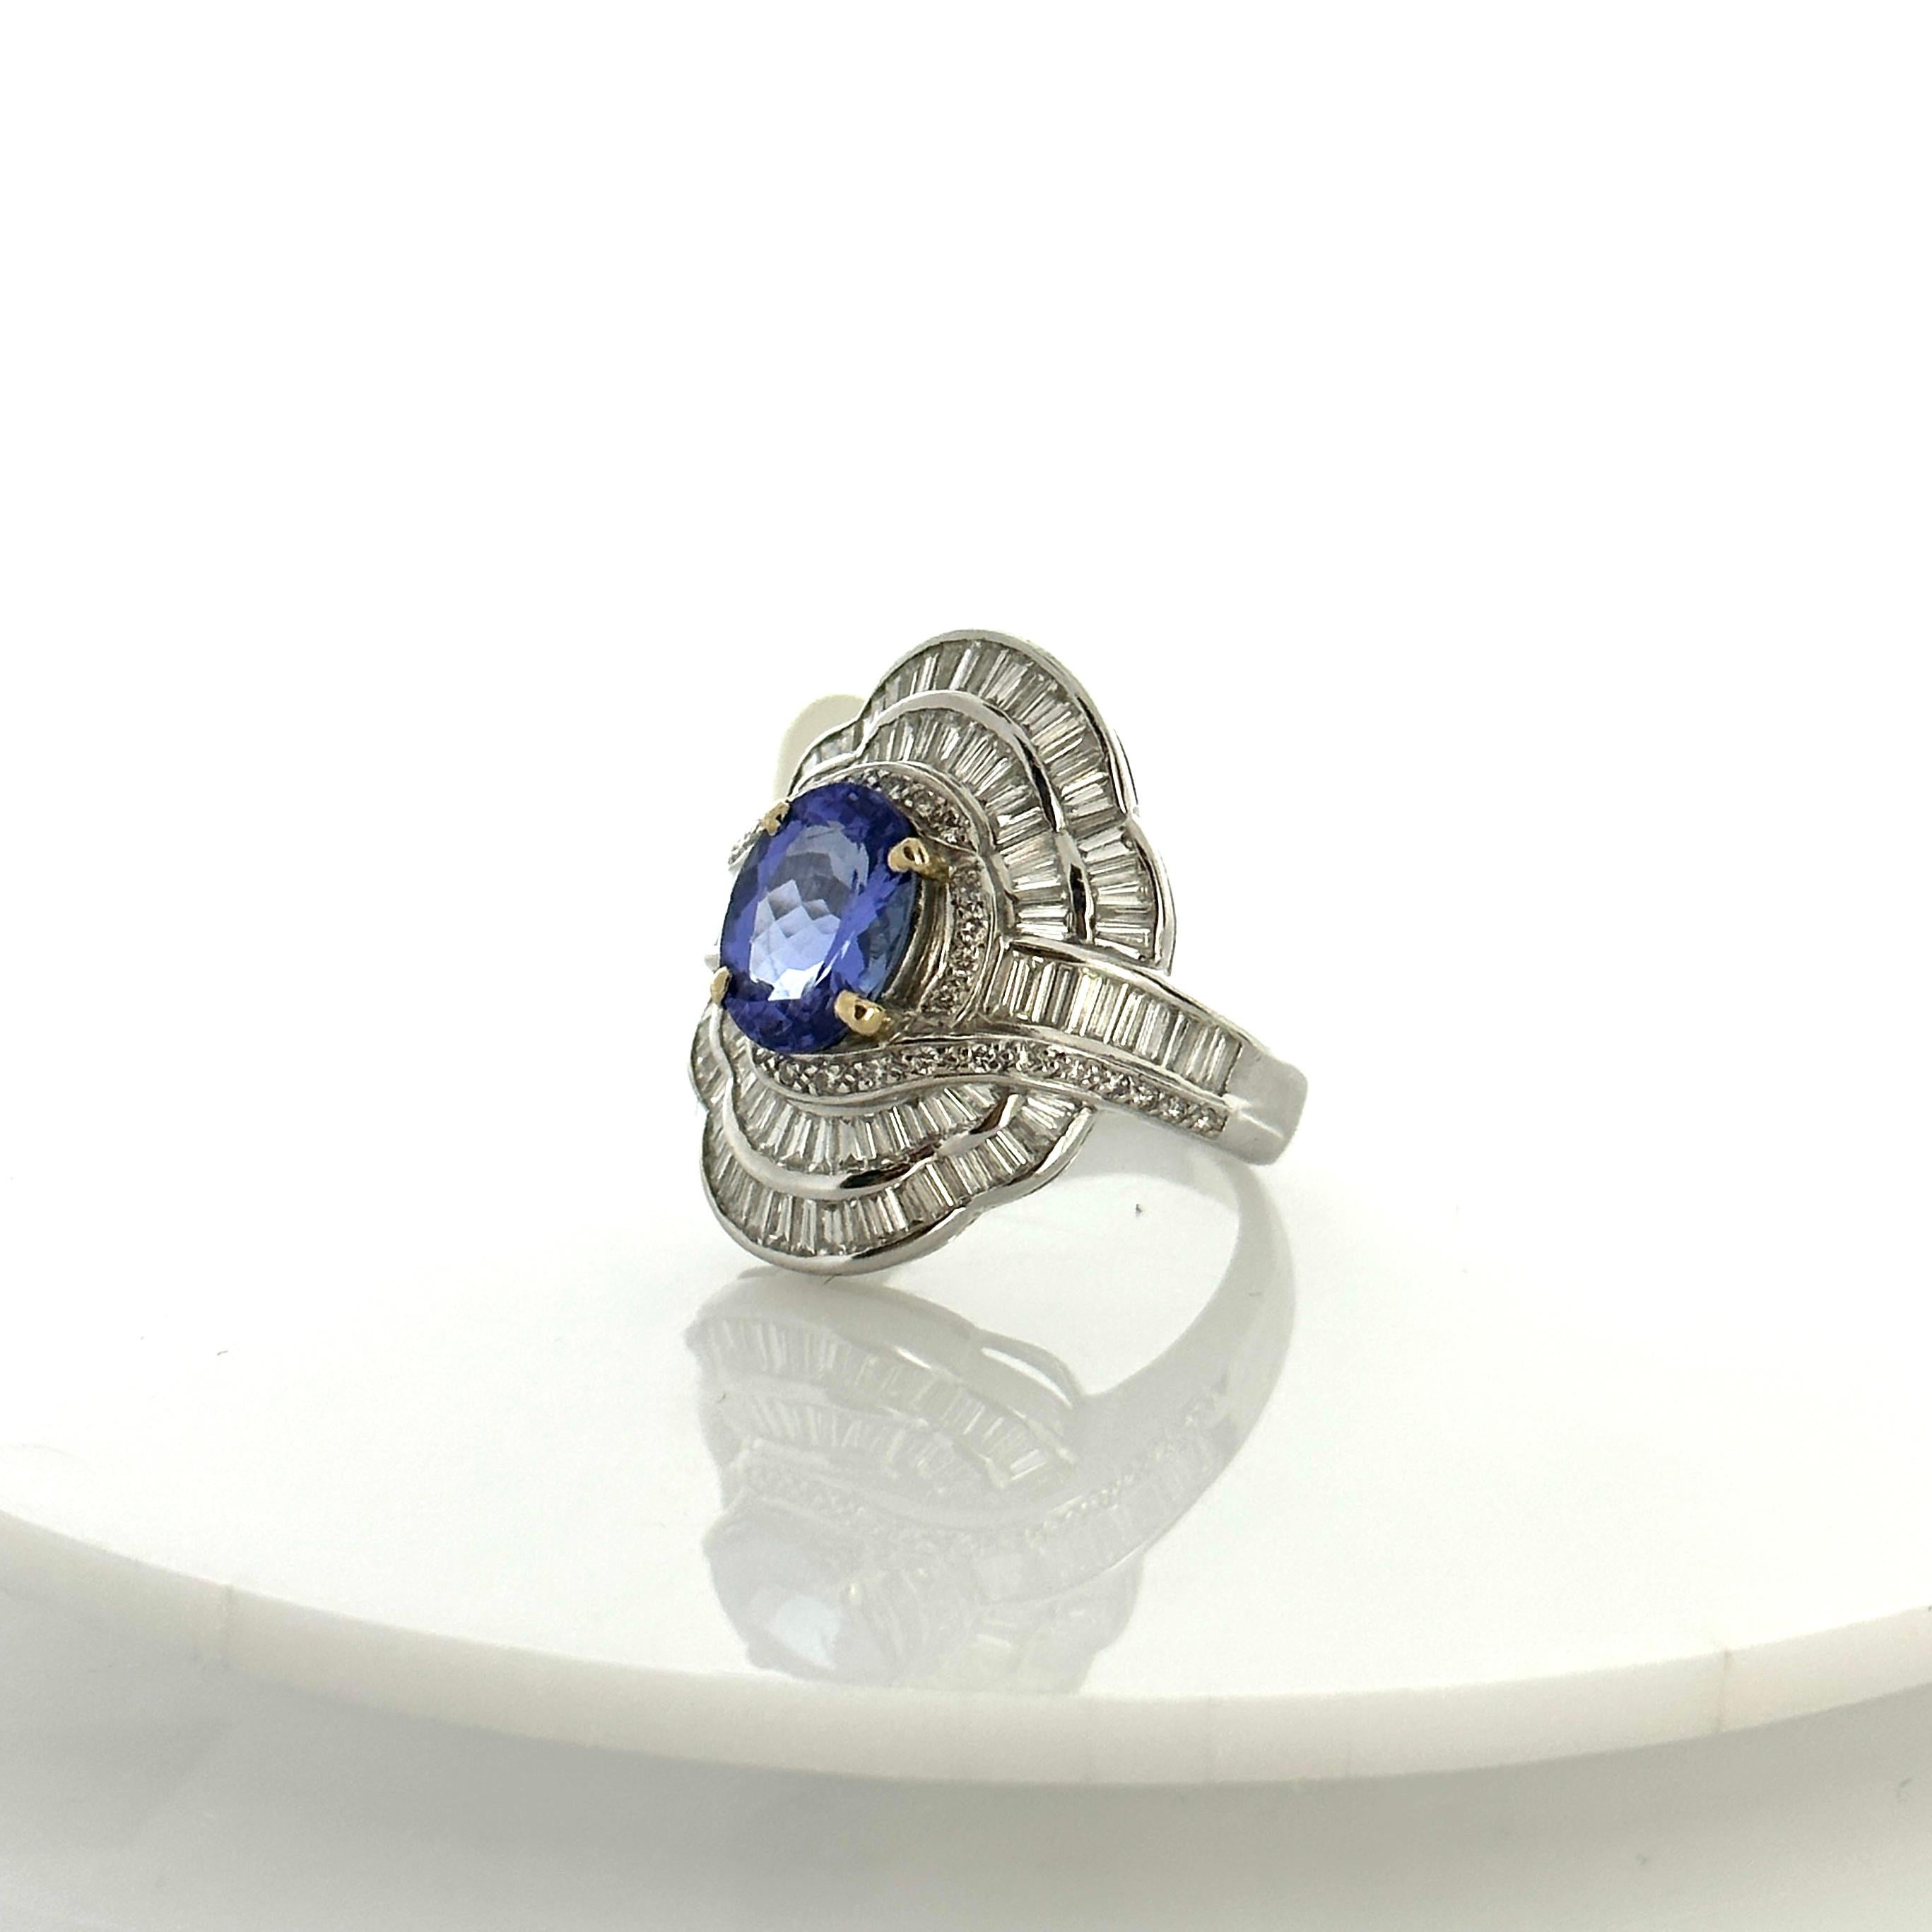 This dazzling ring features a gorgeous 2.17 carats tanzanite center. The gemstone is illuminating and and from the foothills of Mt. Kilimanjaro in Tanzania. The color is a vivid violet-blue. The center is accented by sparkling . 3.56 carats total